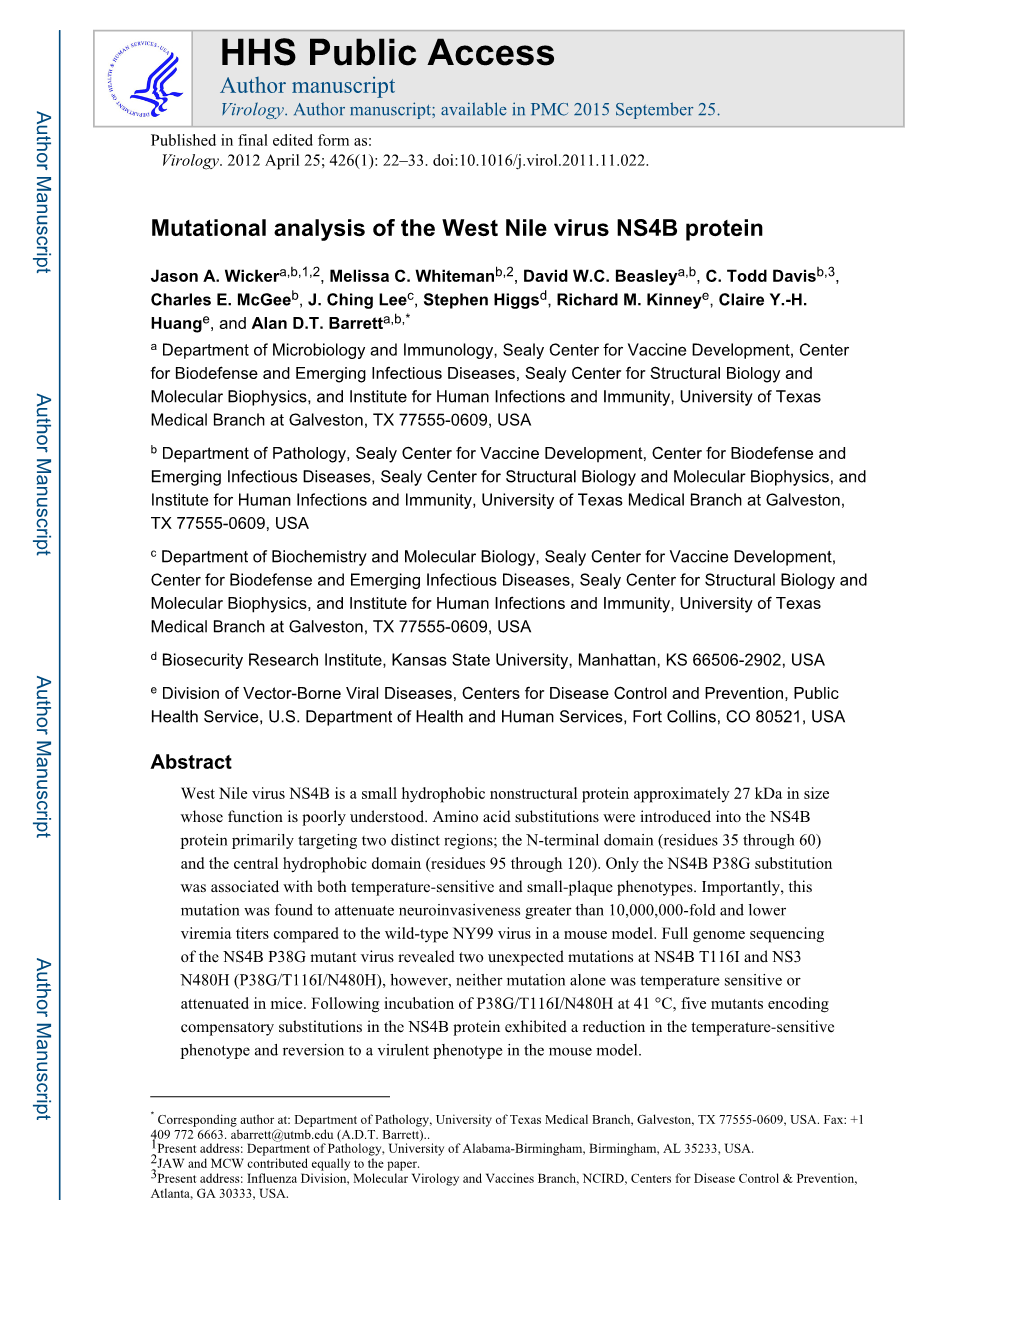 Mutational Analysis of the West Nile Virus NS4B Protein